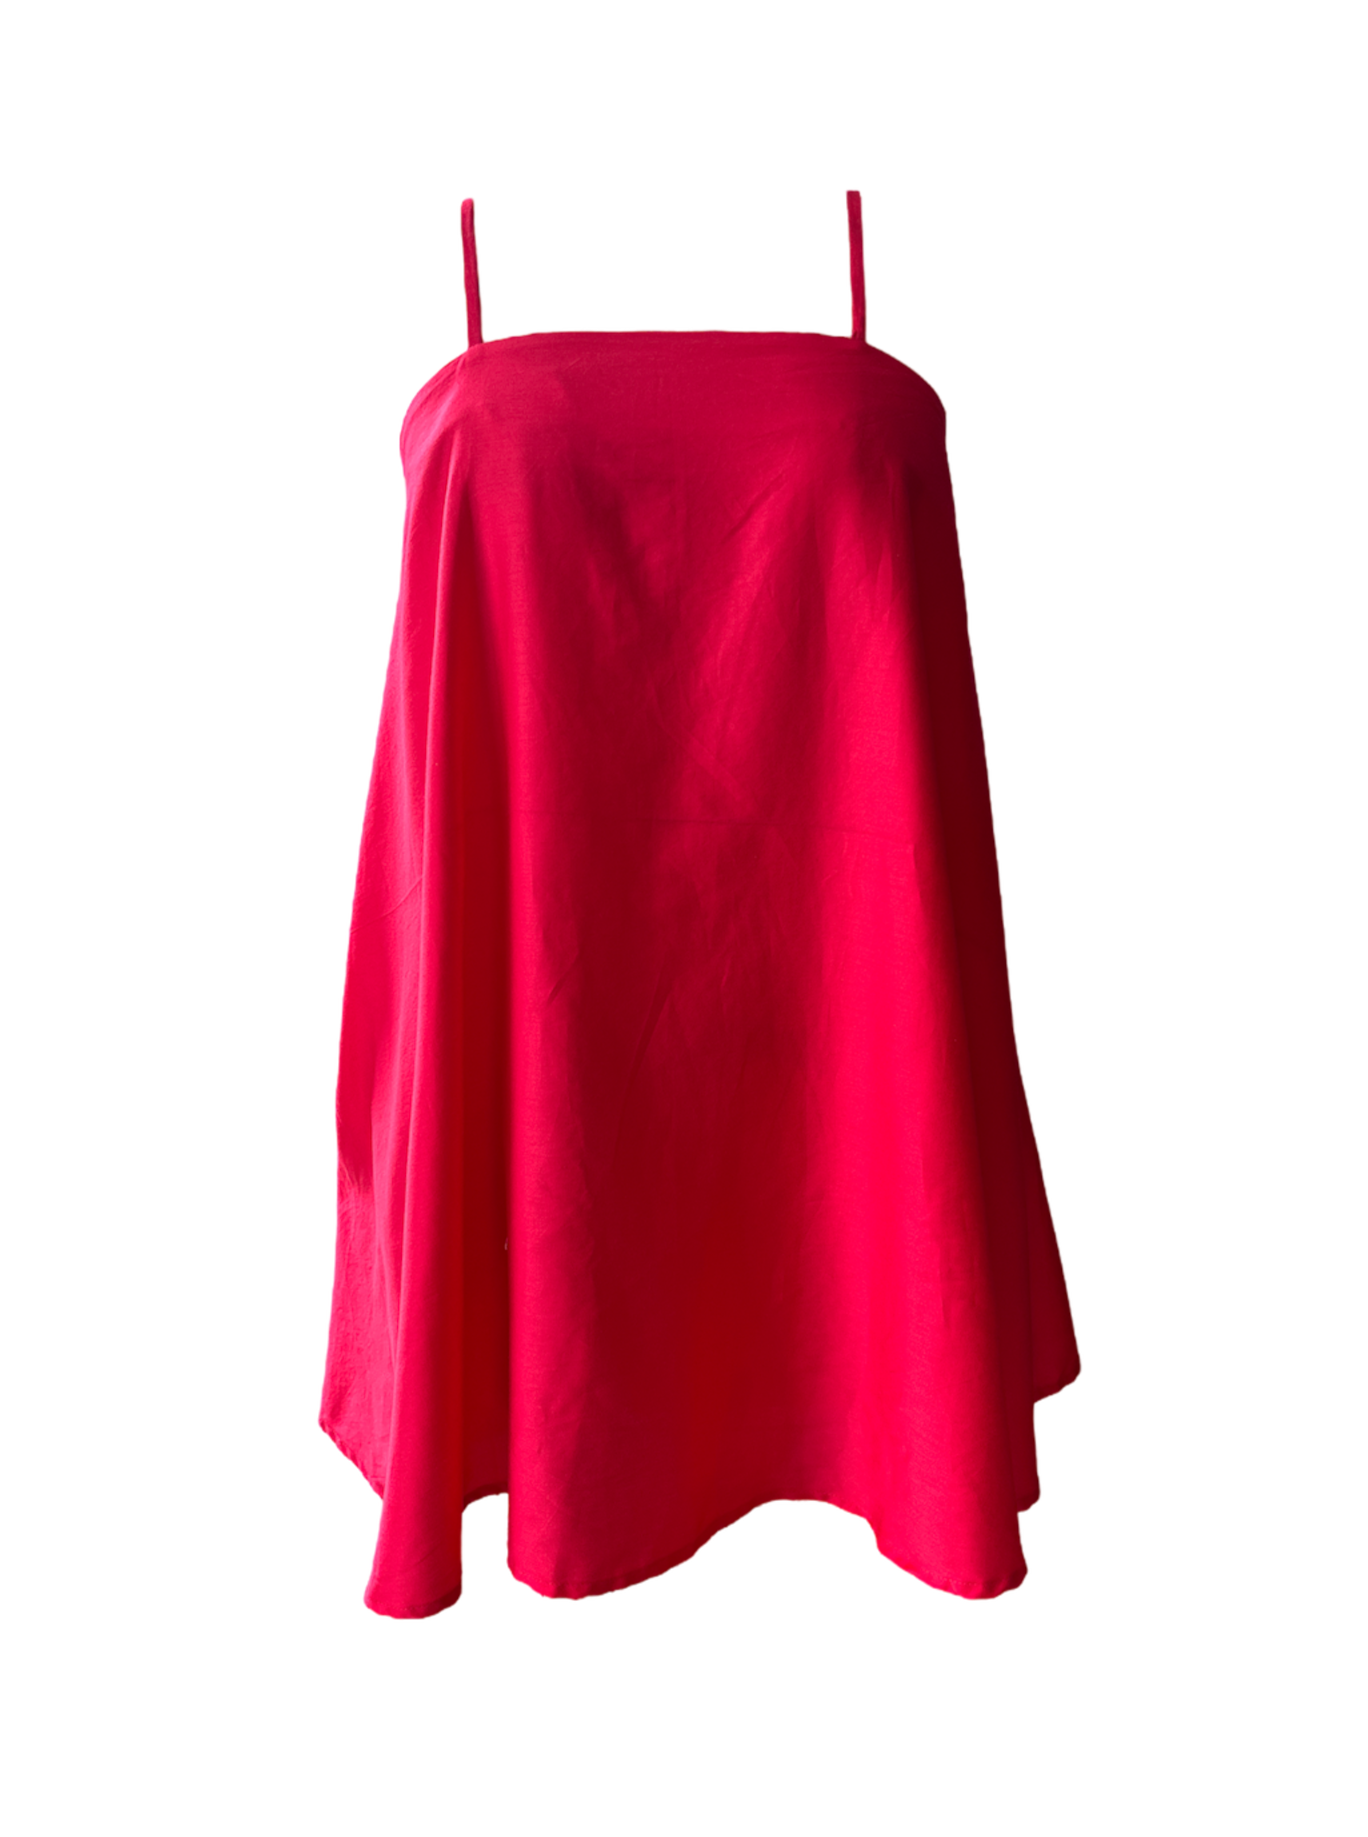 a hot pink color flare tent spaghetti strap dress from adrina fanore